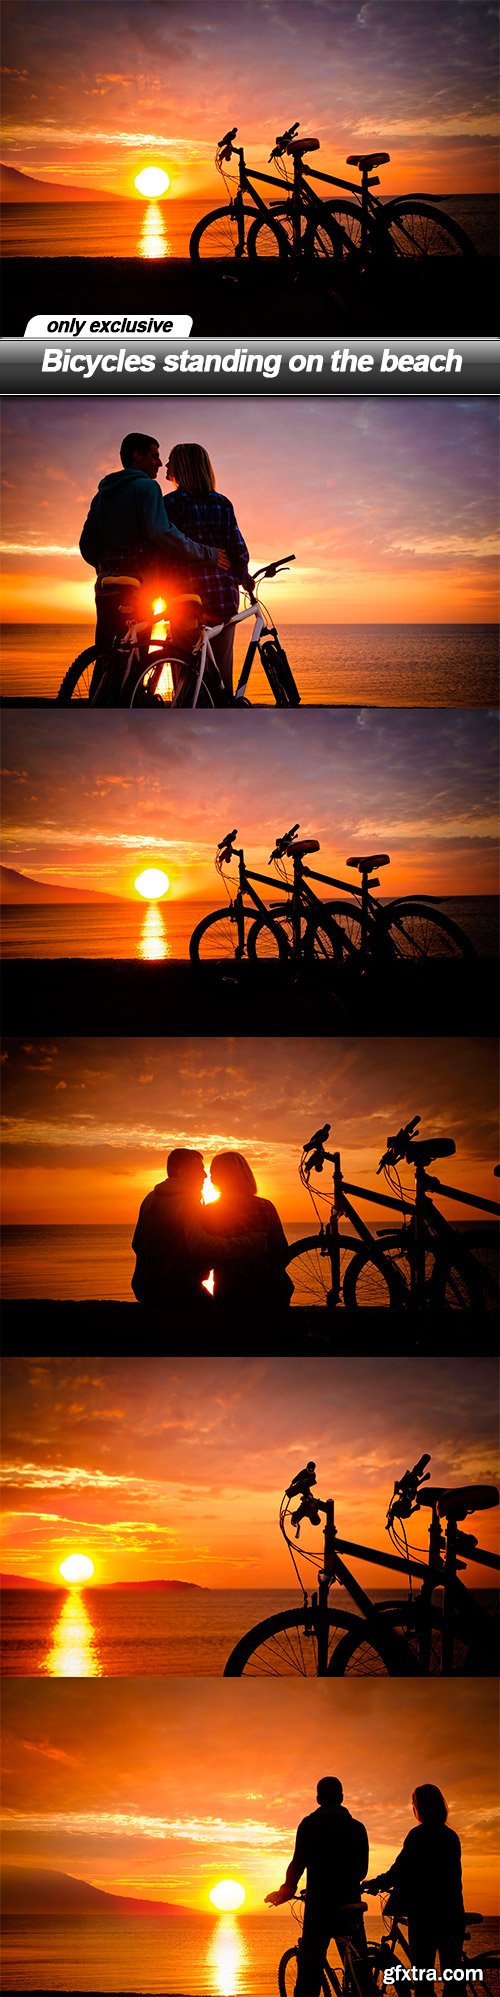 Bicycles standing on the beach - 5 UHQ JPEG